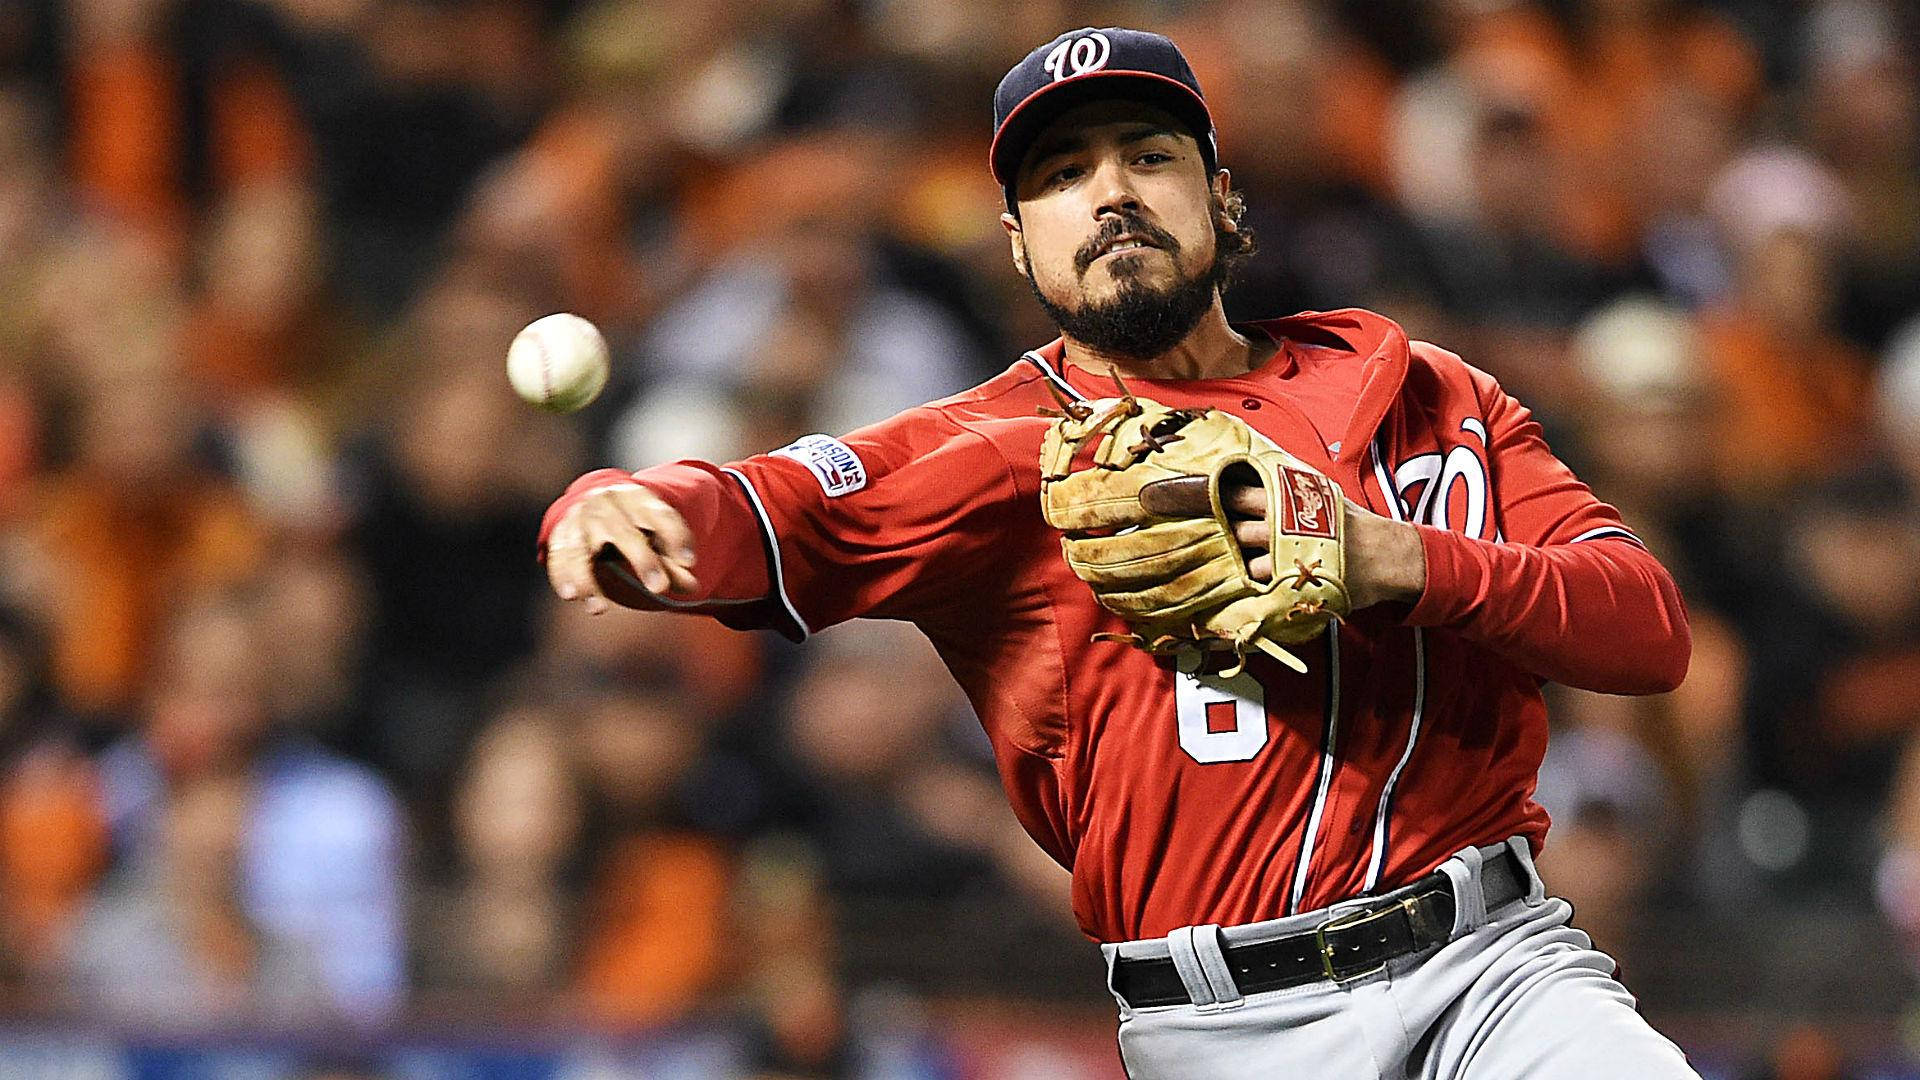 Anthony Rendon Throwing Ball In Red Uniform Background